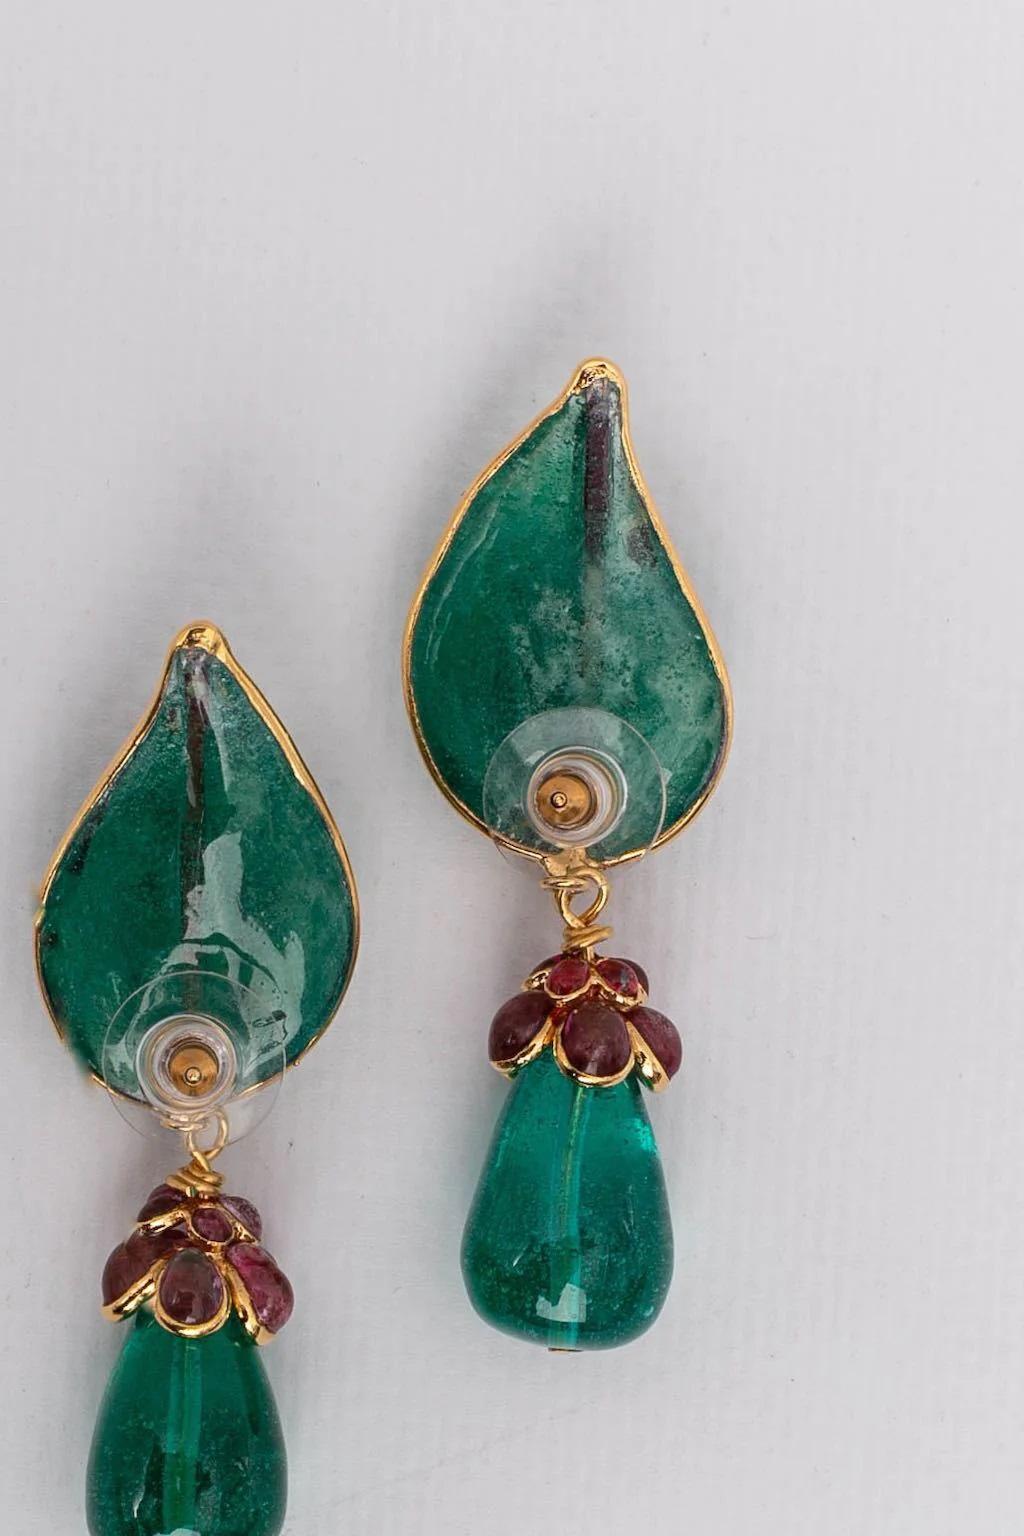 Artist Augustine Gilted Metal Earrings with Green Glass Paste For Sale